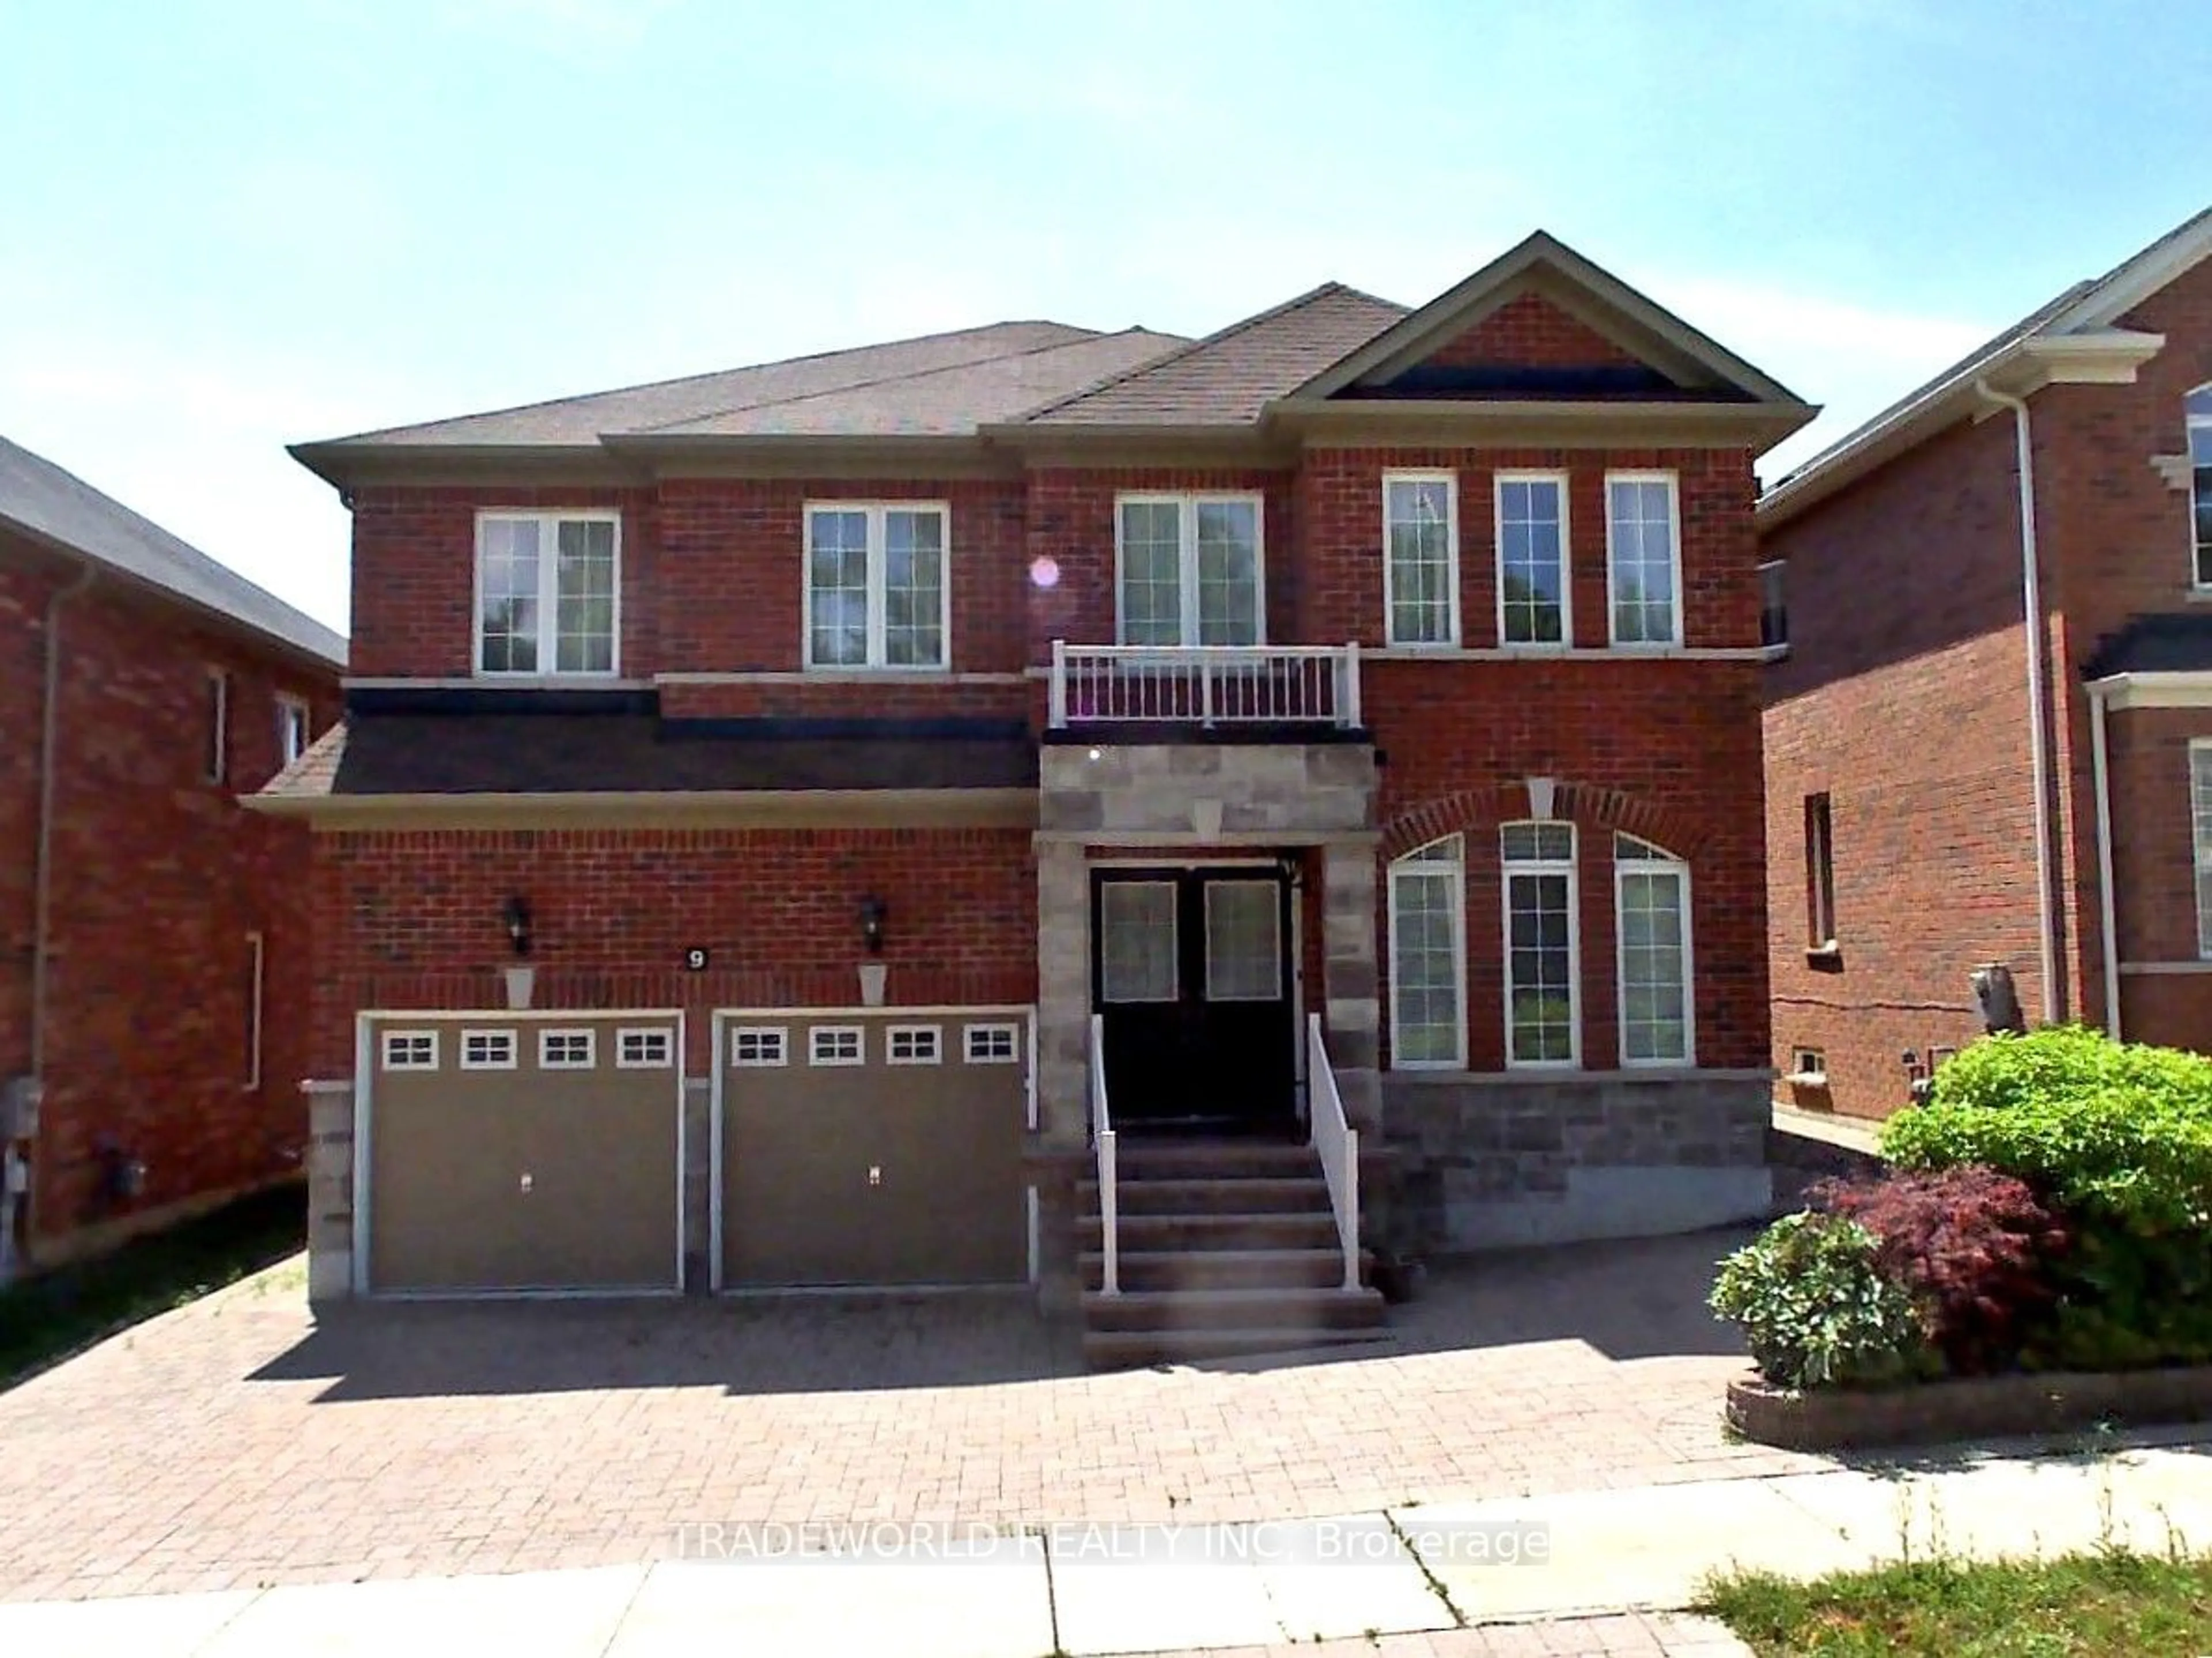 Home with brick exterior material for 9 Wiley Ave, Richmond Hill Ontario L4S 0C6